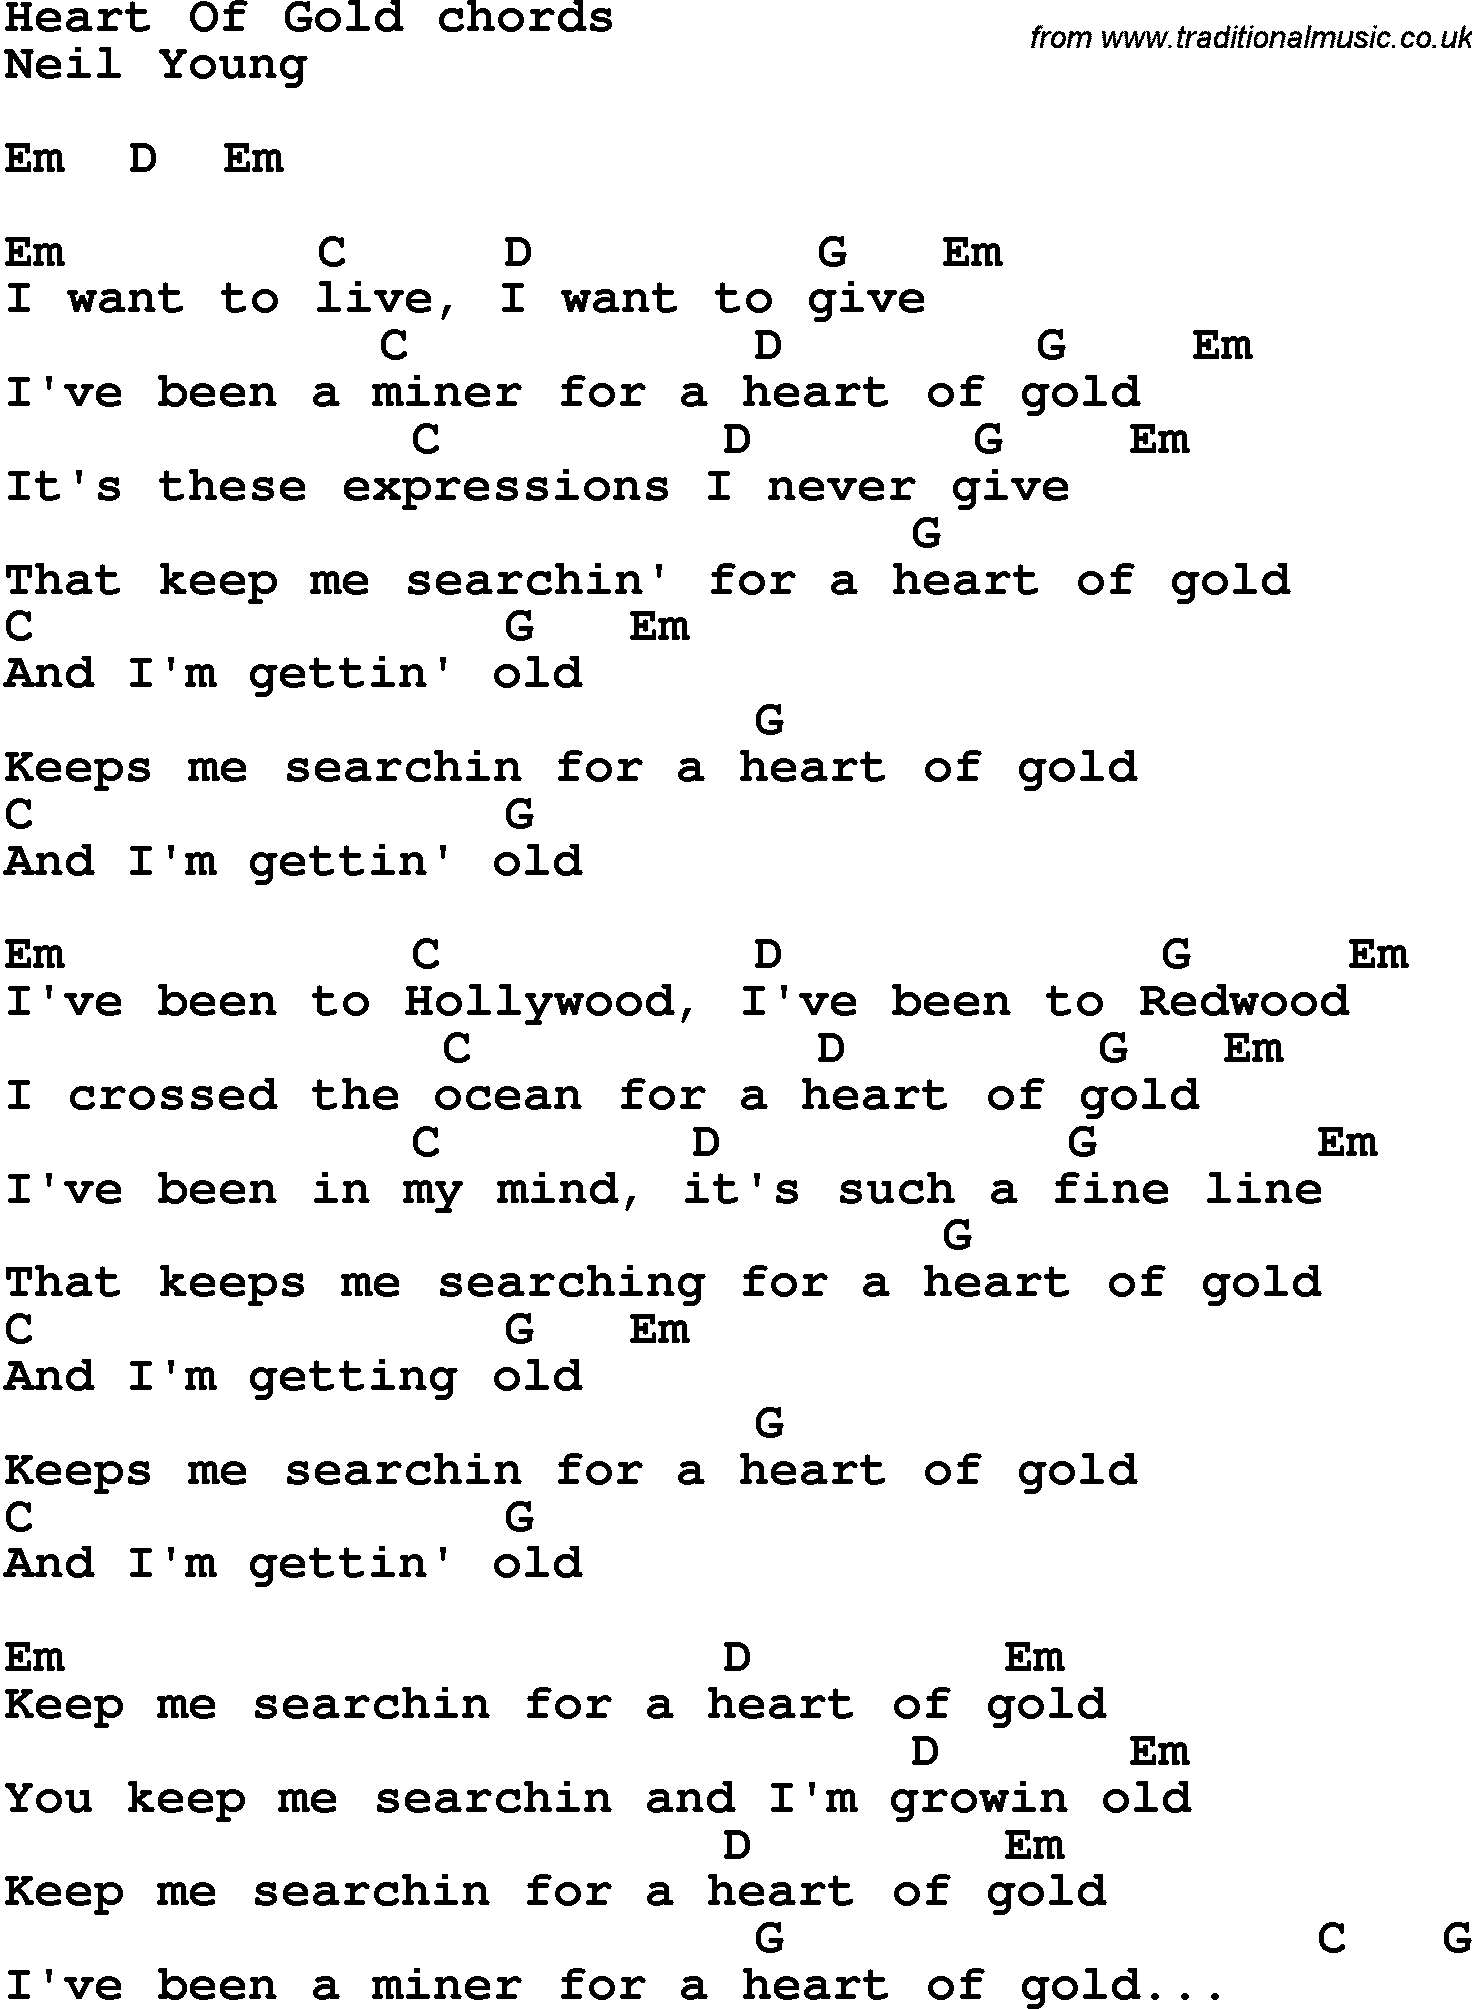 Song Lyrics with guitar chords for Heart Of Gold